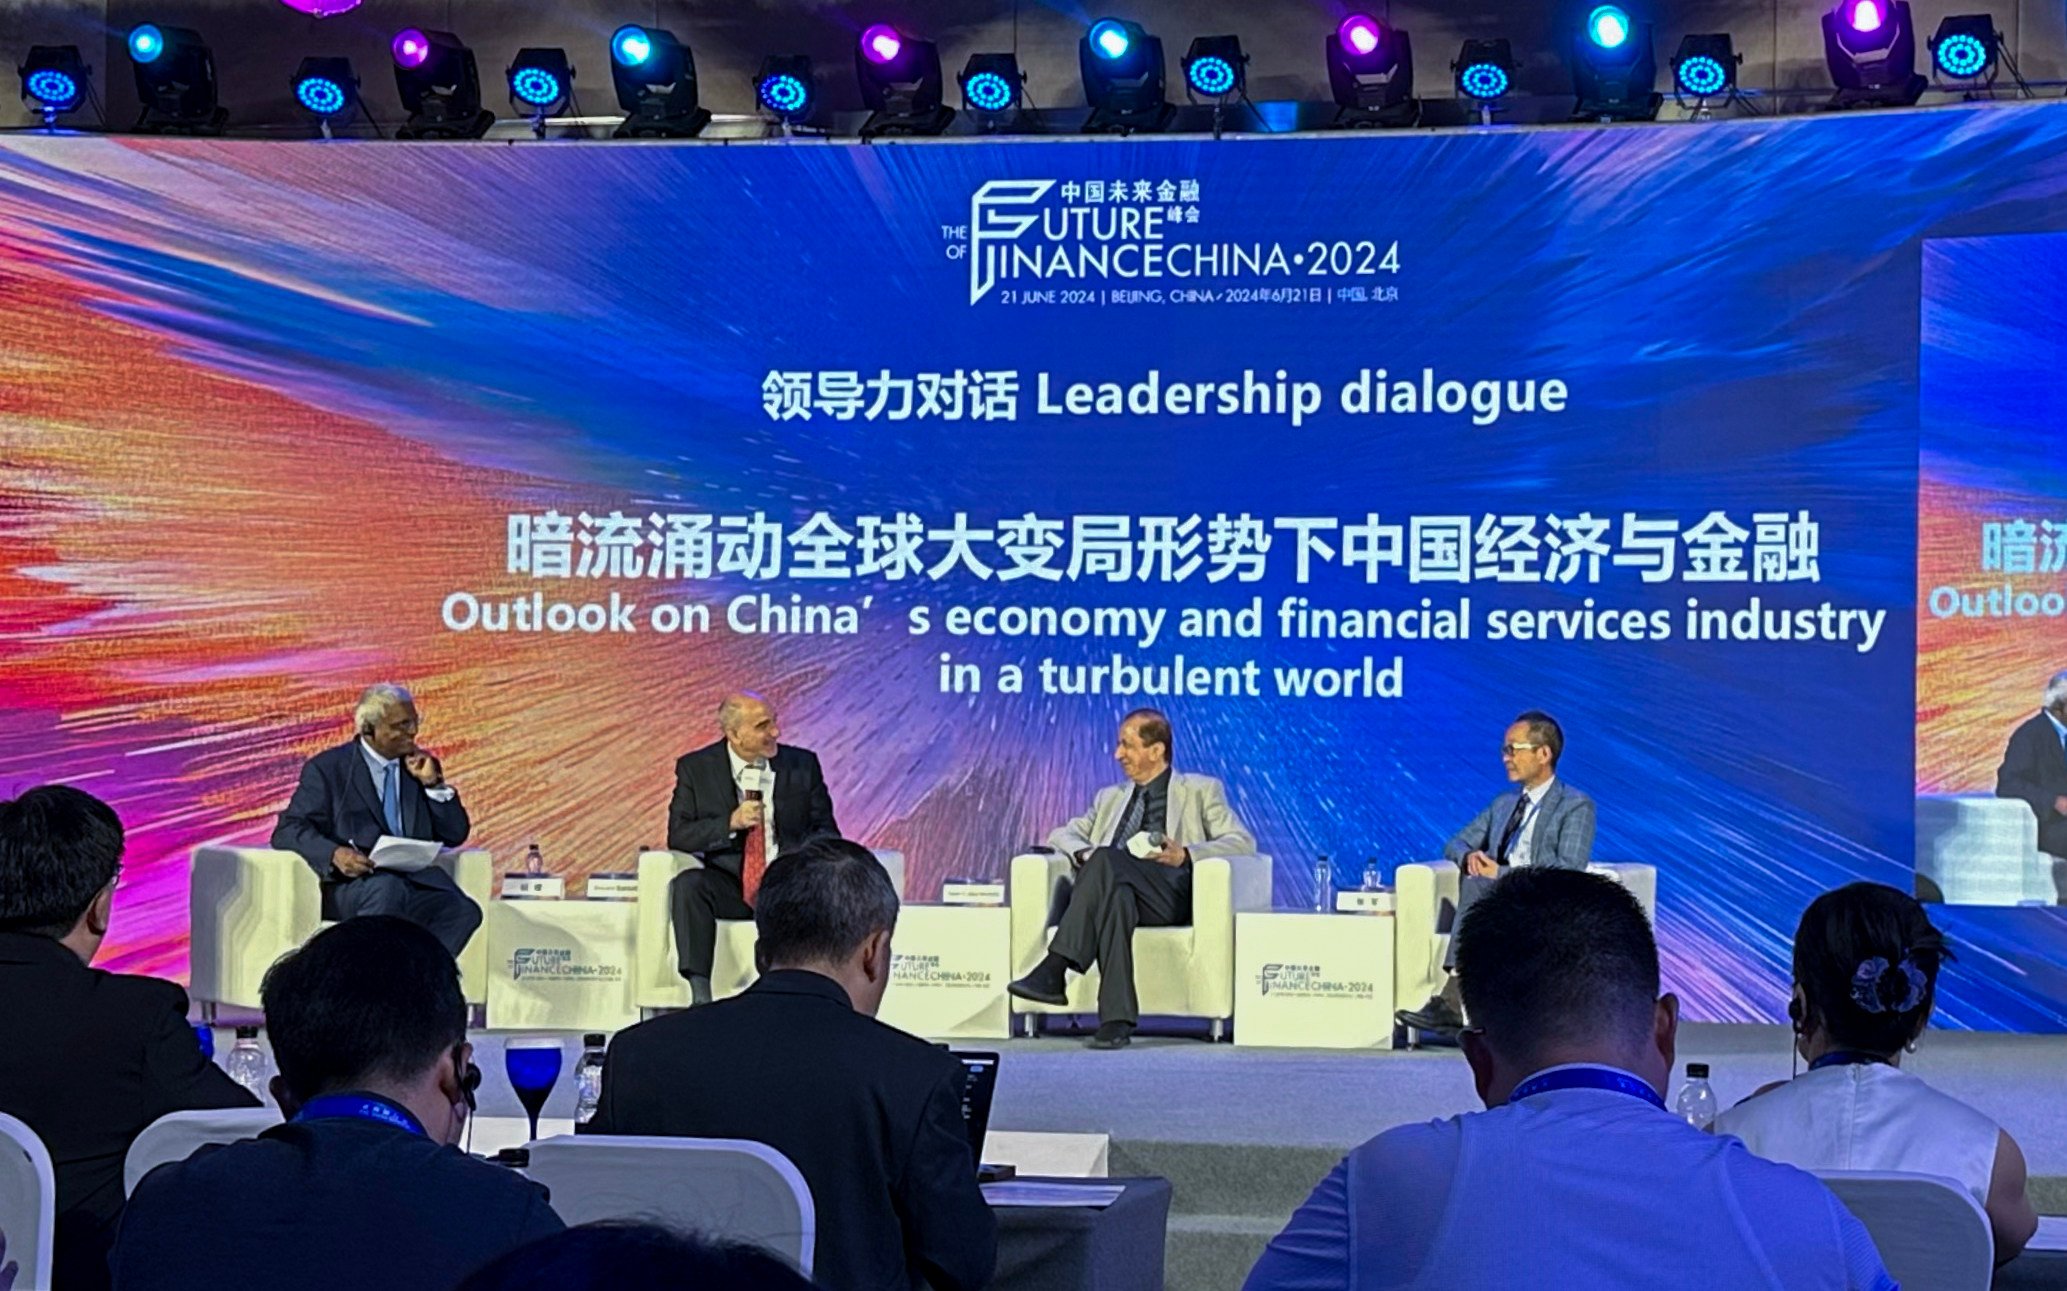 Panellists take part in a discussion at the Future of Finance China Conference in Beijing on Friday. Photo: Yuke Xie